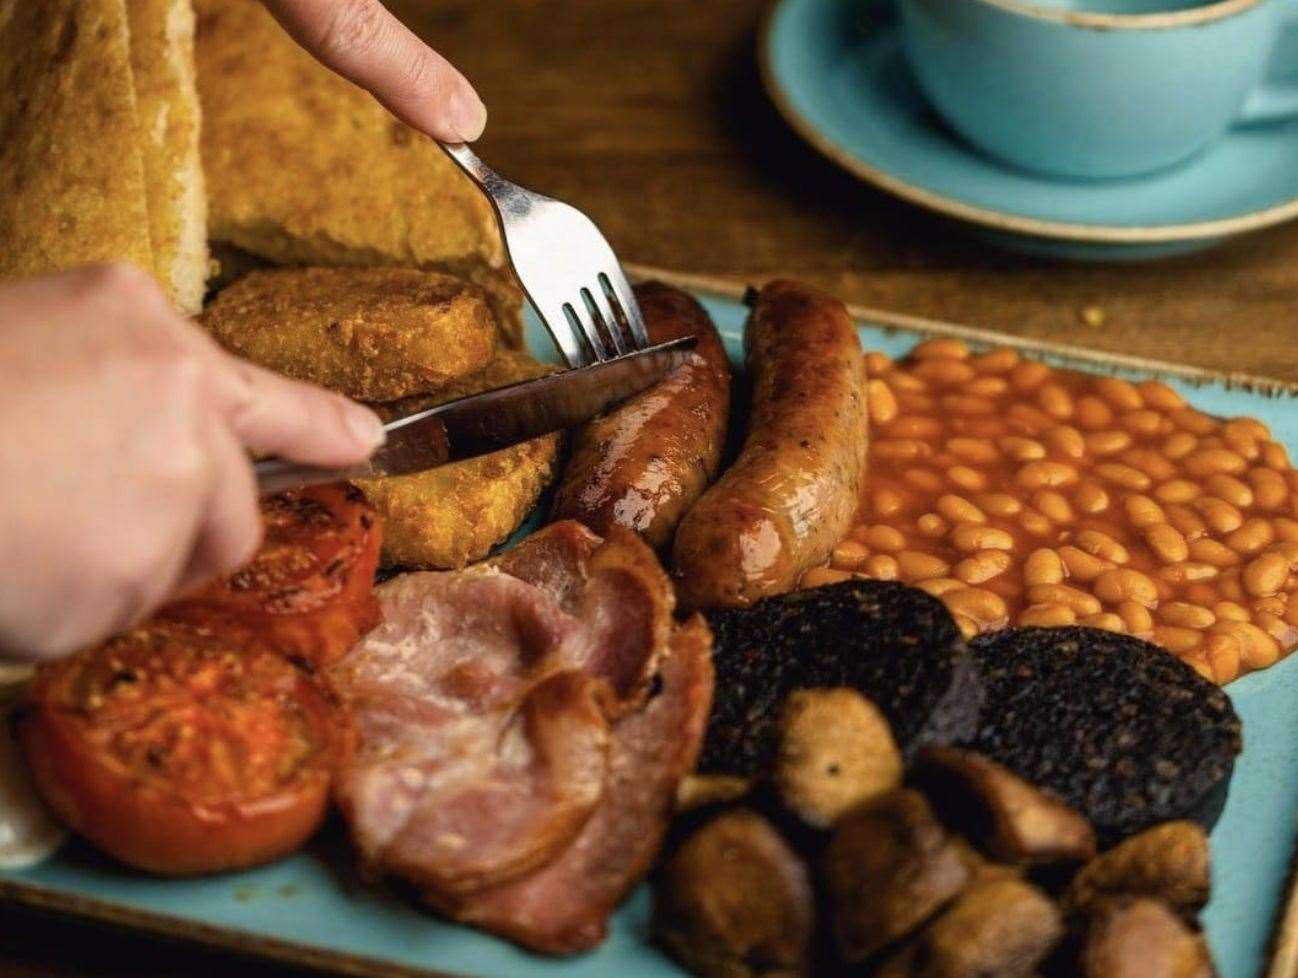 Wellingtons Dover uses free-range eggs and local butcher meats to make their fry-up breakfasts. Picture: Wellingtons Dover